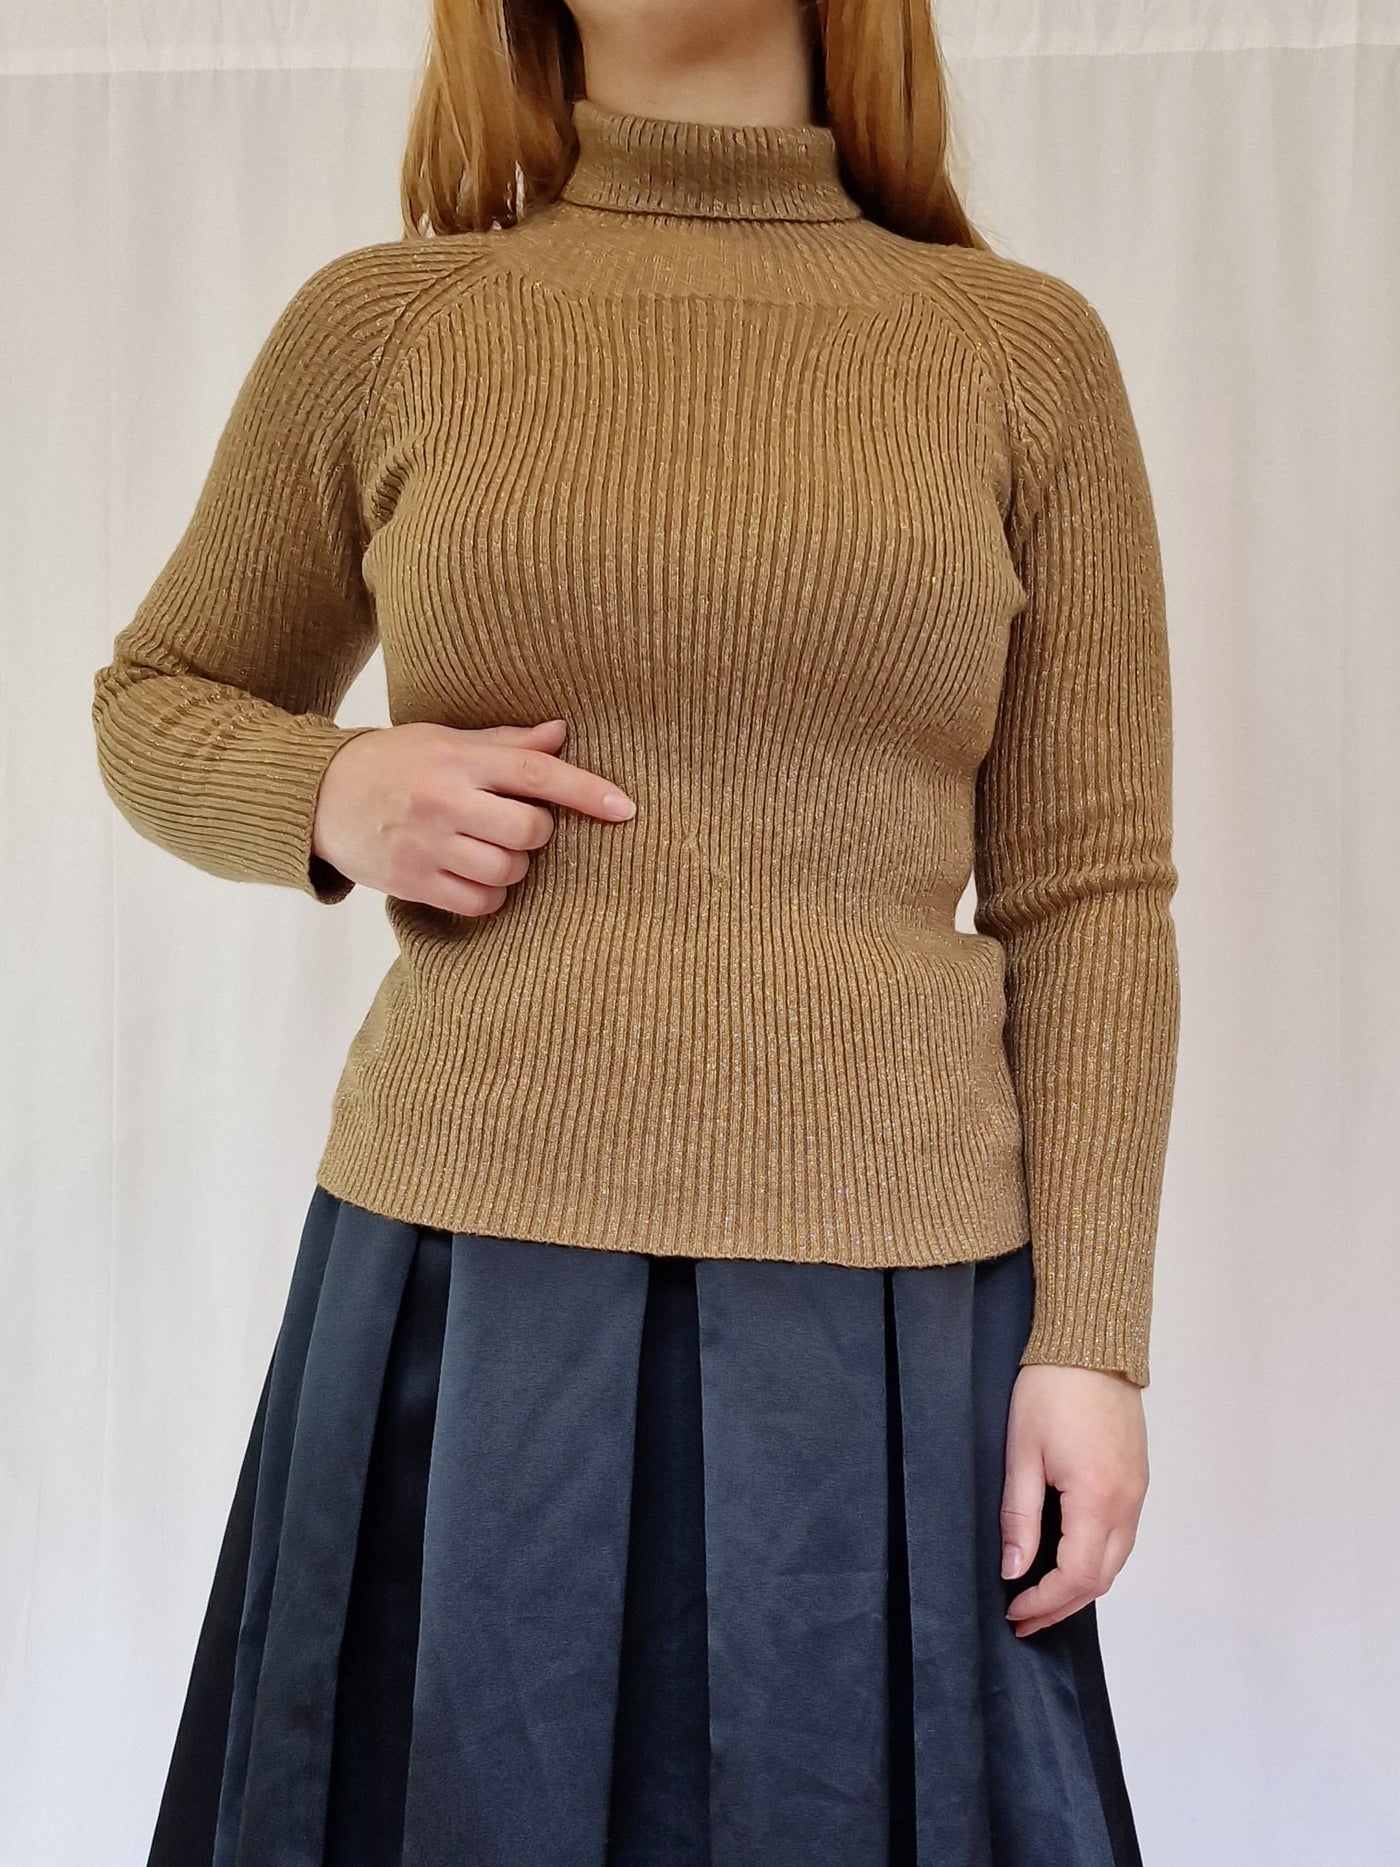 Vintage Polo Neck Long Sleeved Knitted Top with Gold Thread - XS